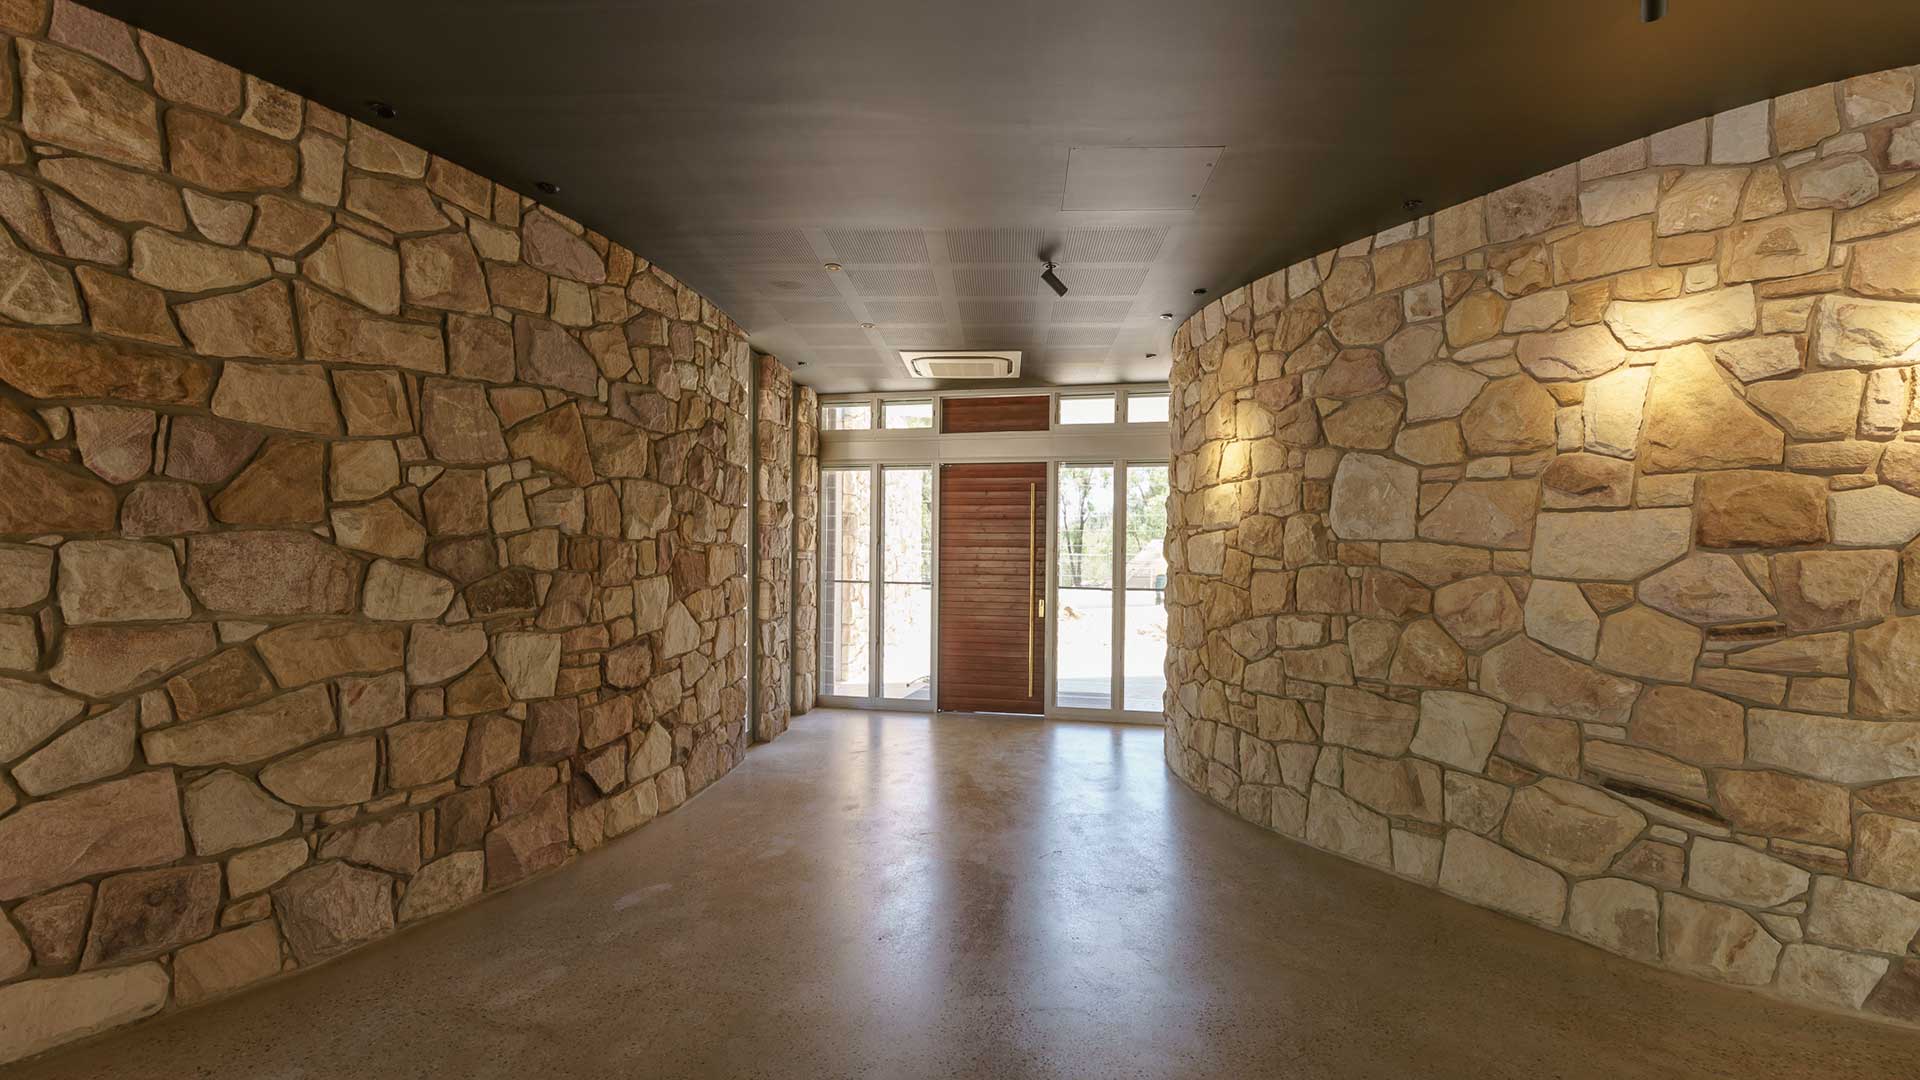 Warrumbungles Visitor Centre - Inside Entrance| Hines Constructions, Central West NSW